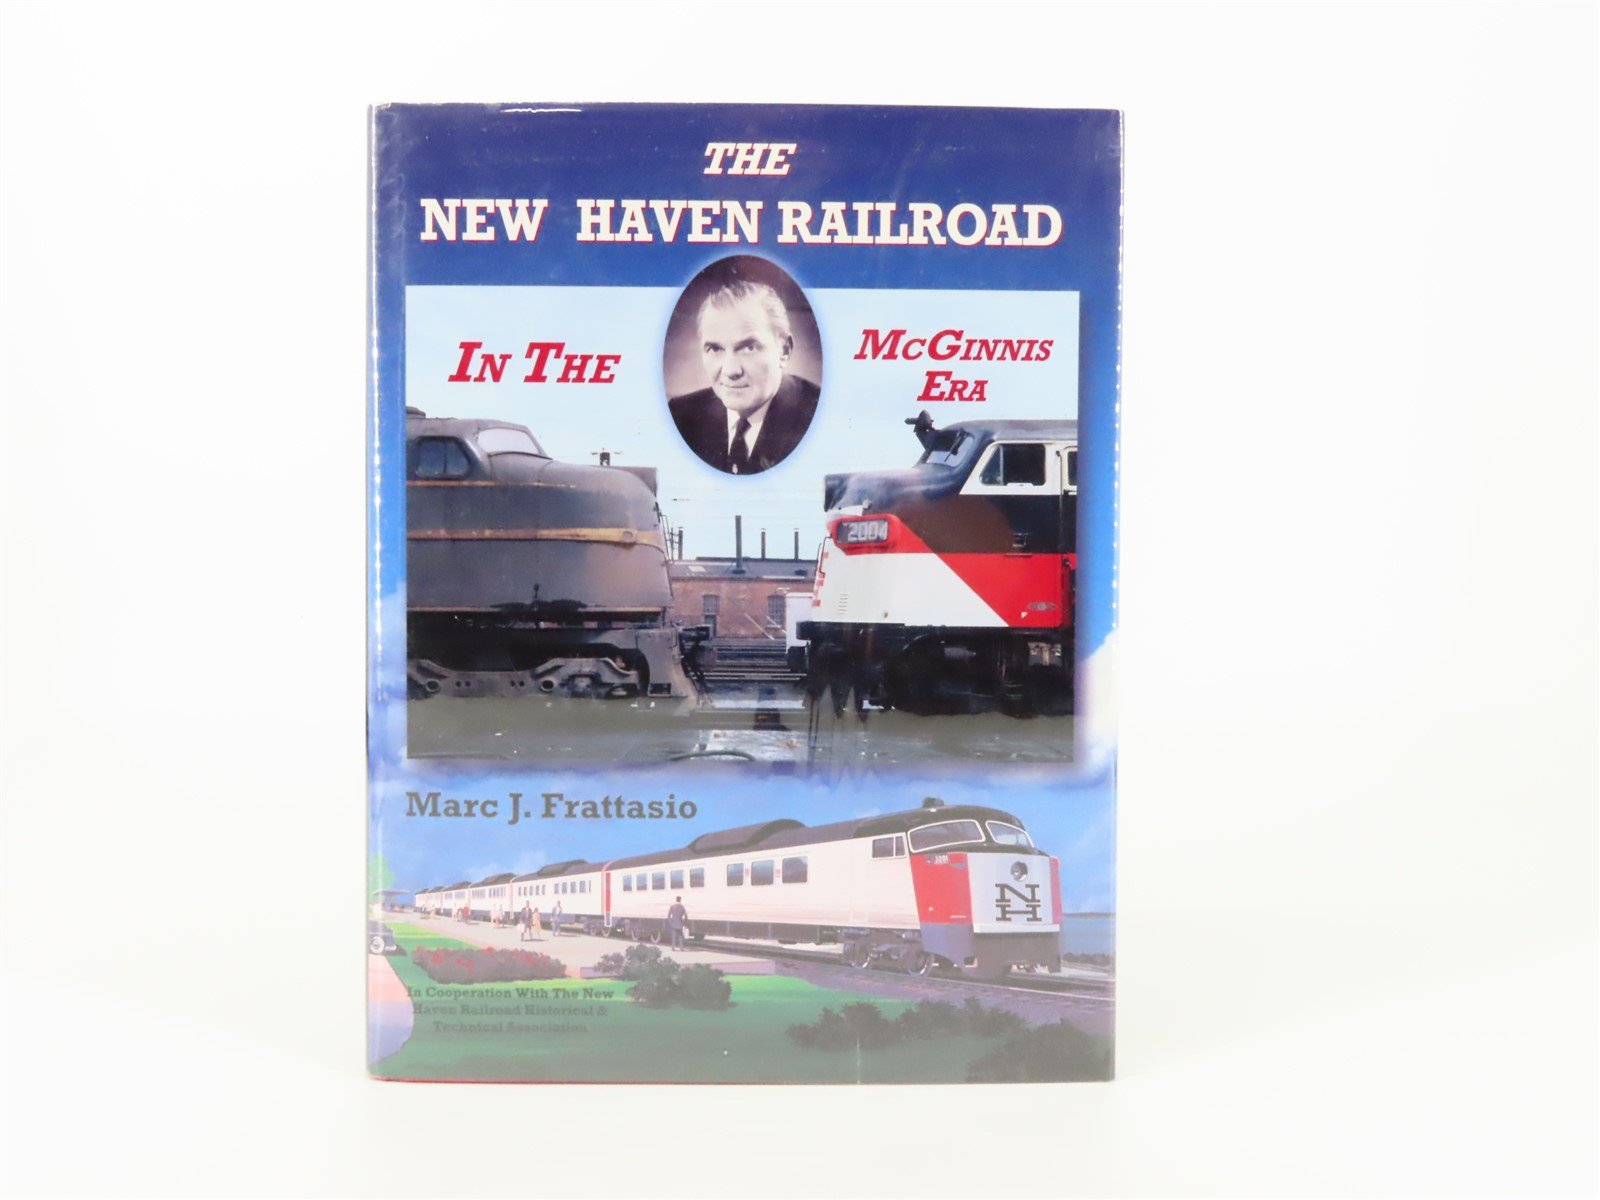 The New Haven Railroad In The McGinnis Era by Marc J. Frattasio ©2003 HC Book